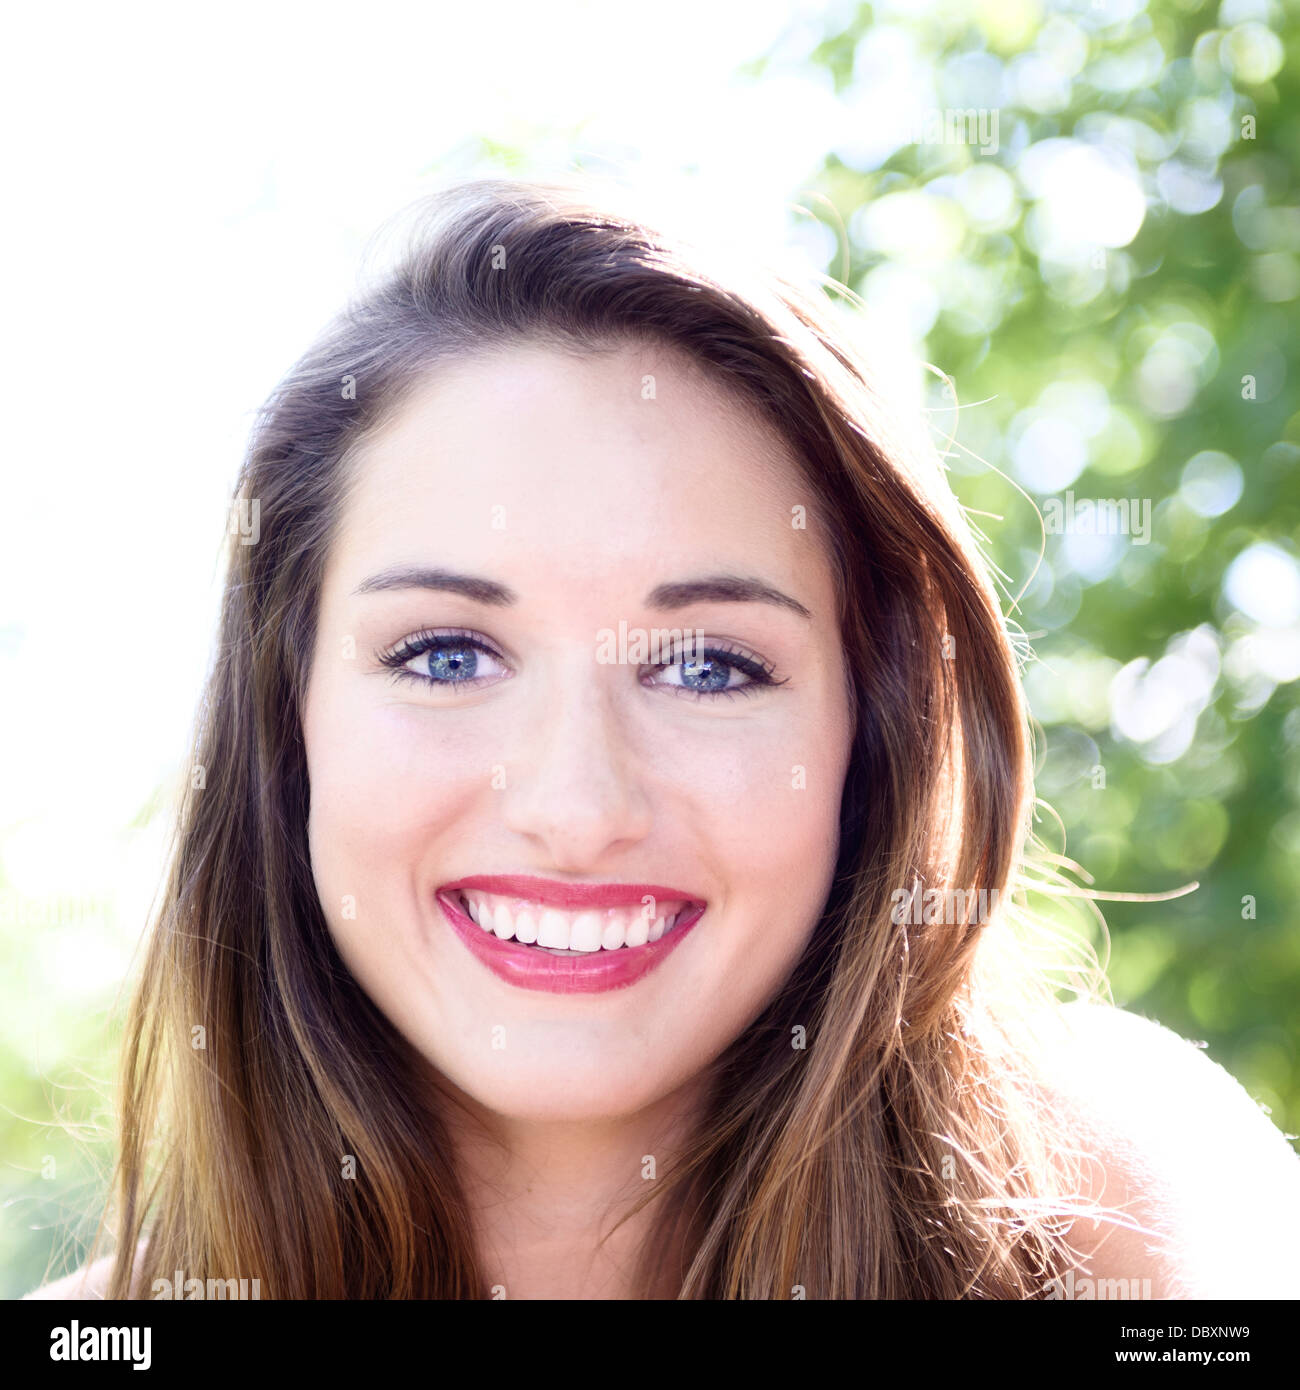 Close-up headshot of a young woman smiling. Stock Photo